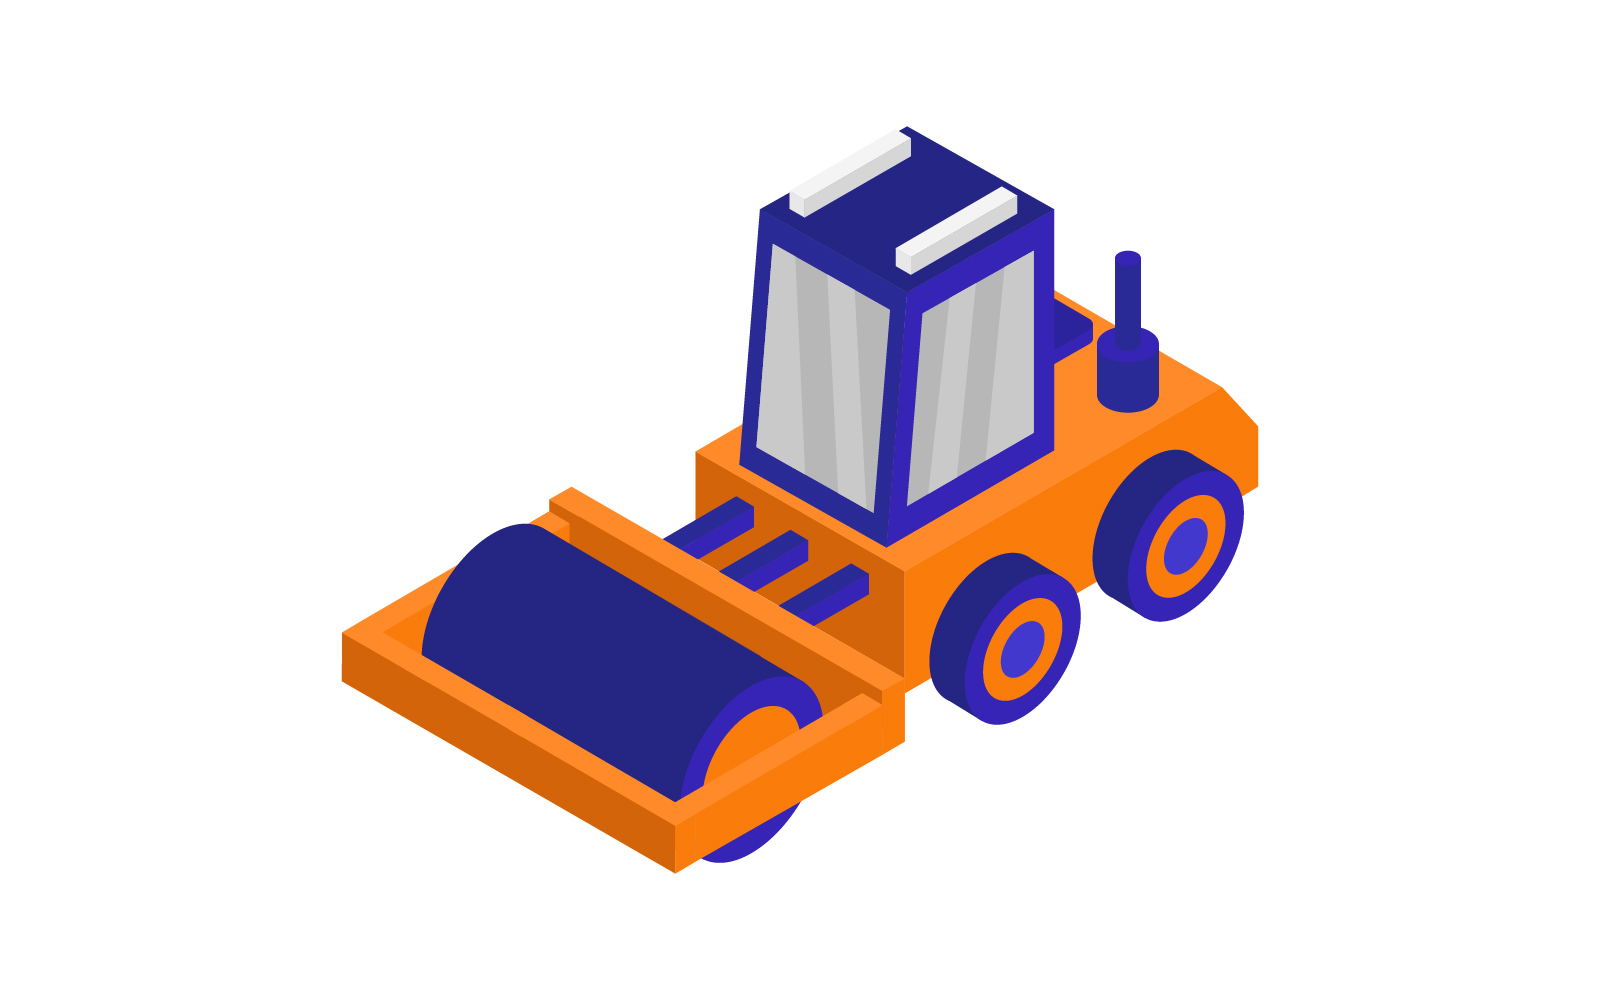 Road roller illustrated in vector on a white background